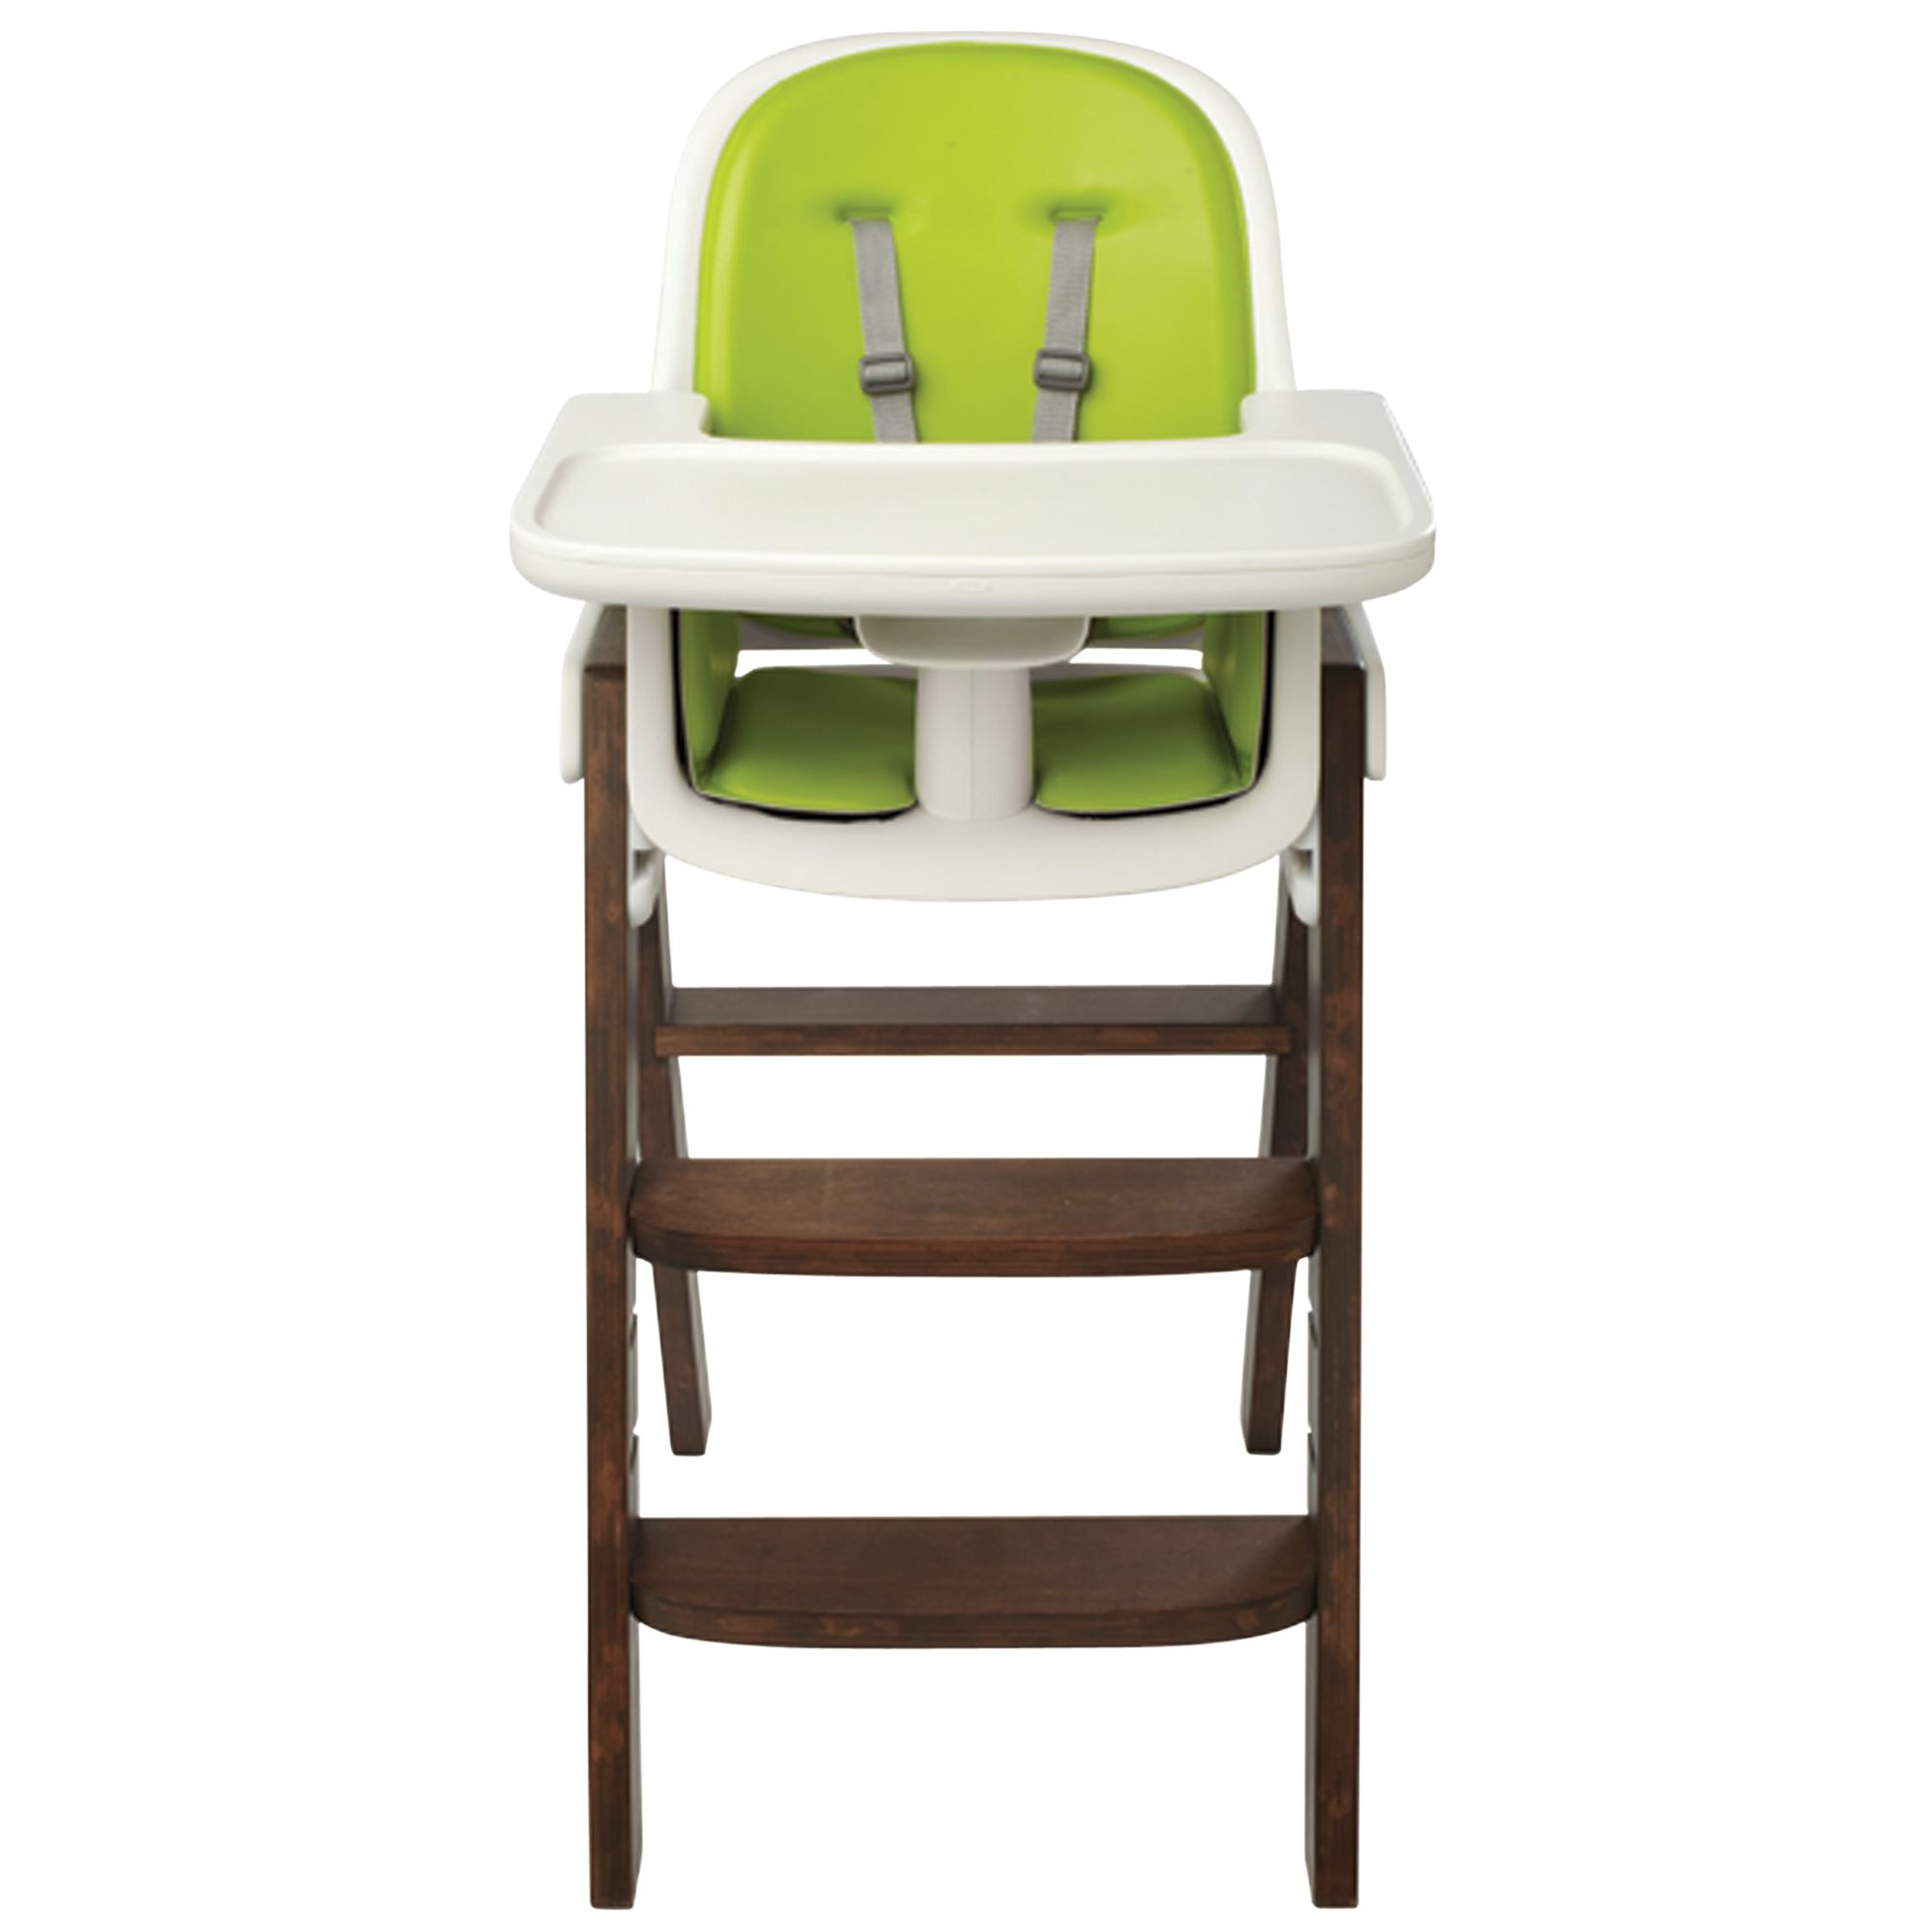 Oxo Tot Sprout Highchair, Green/White